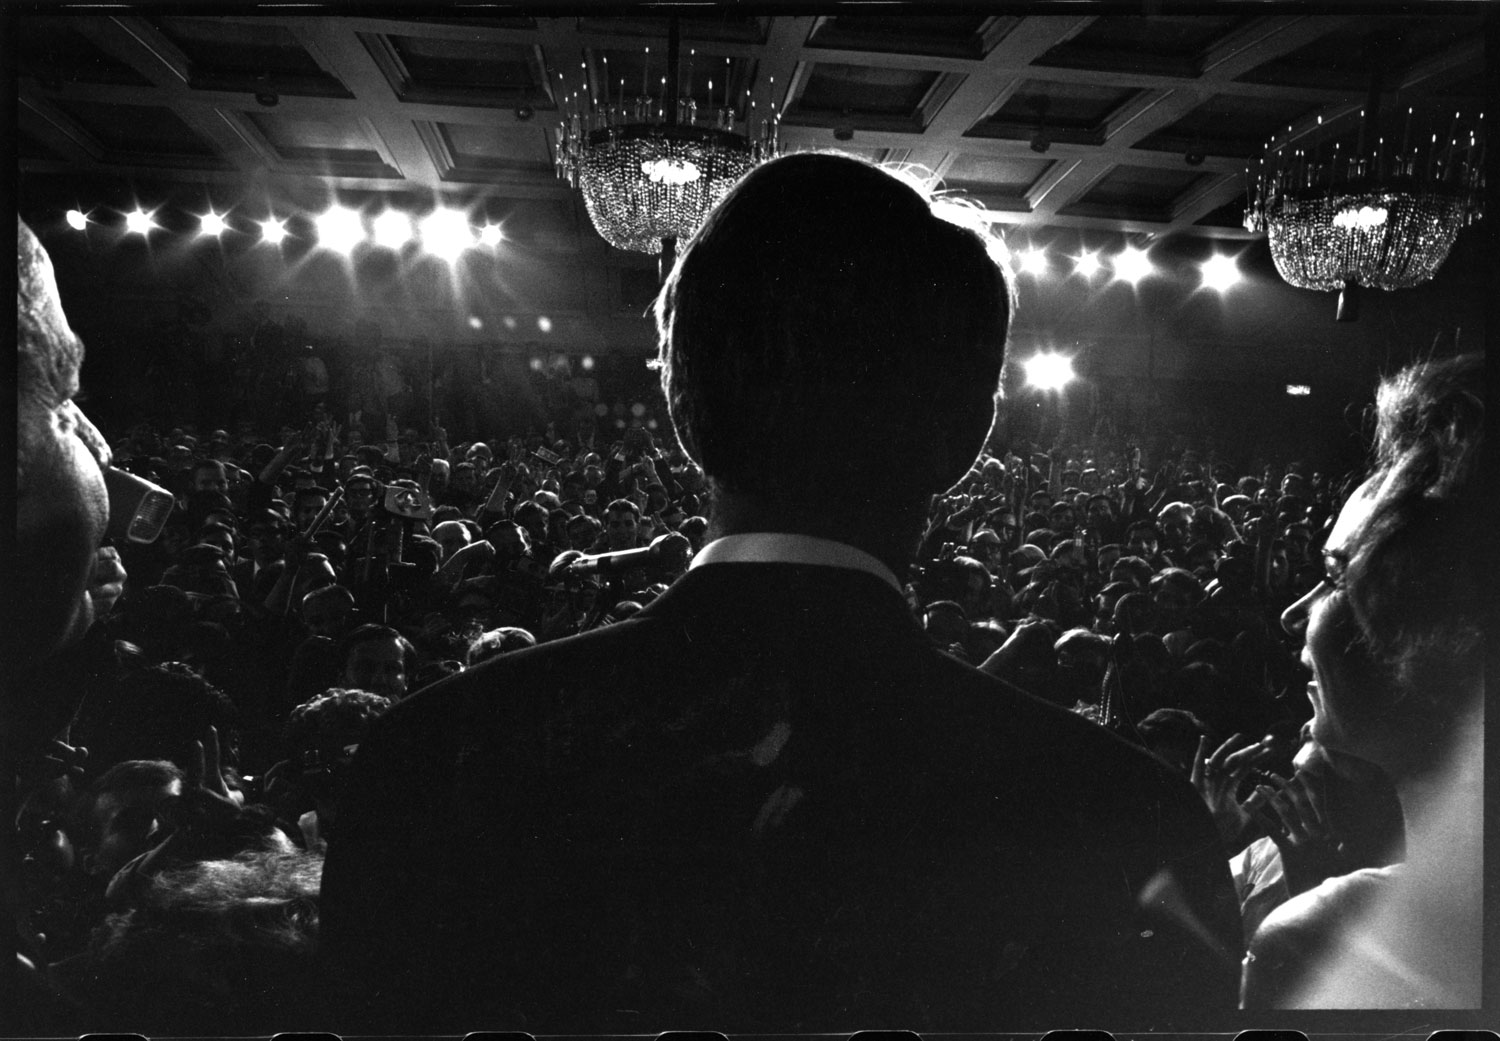 Sen. Robert Kennedy gives a speech at the Ambassador Hotel in Los Angeles before his assassination, June 1968.